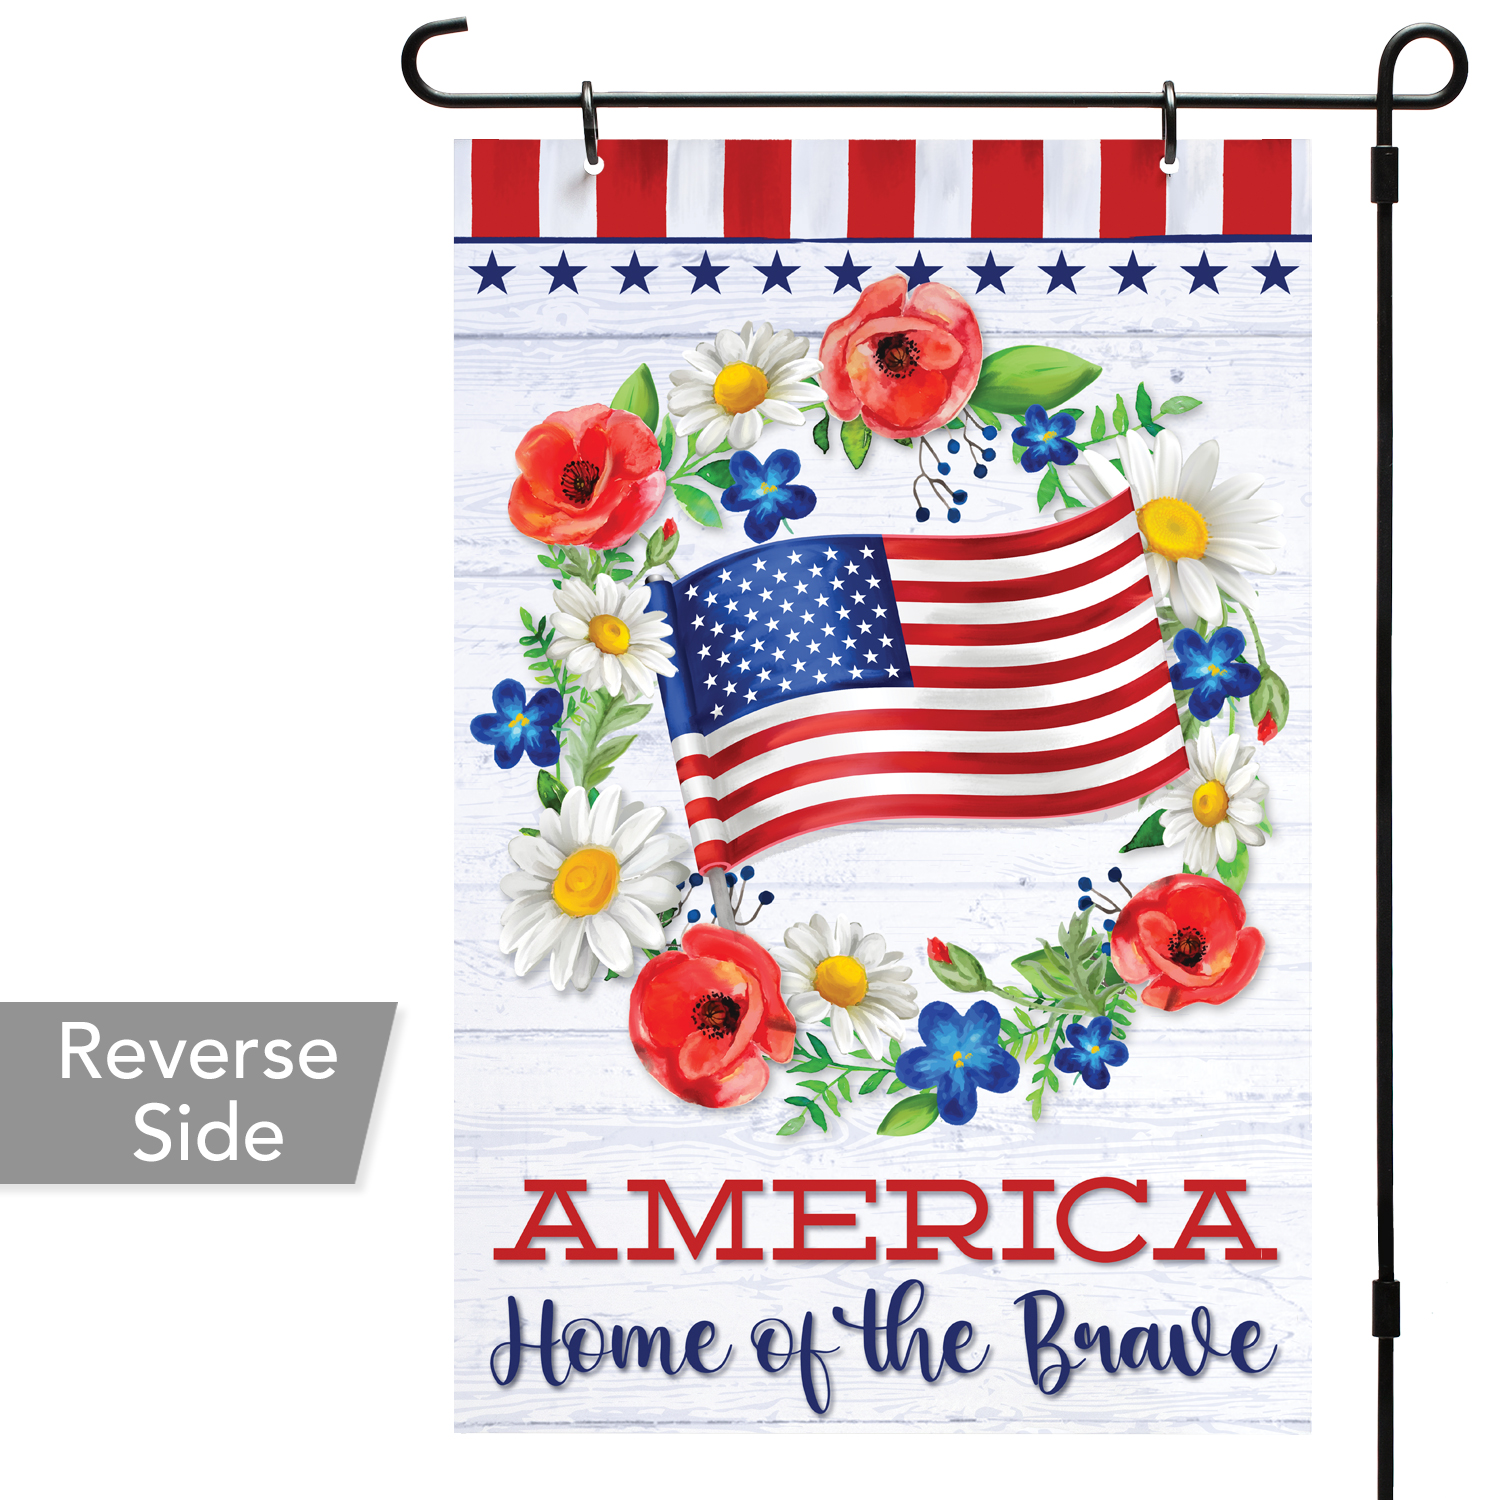 CounterArt "Patriotic Flower Garden Flag" 18.25" x 12", Reversible Multi-Image Reusable Outdoor Garden Flag, Made in the USA, Holds Color, Easy to Clean - image 2 of 4